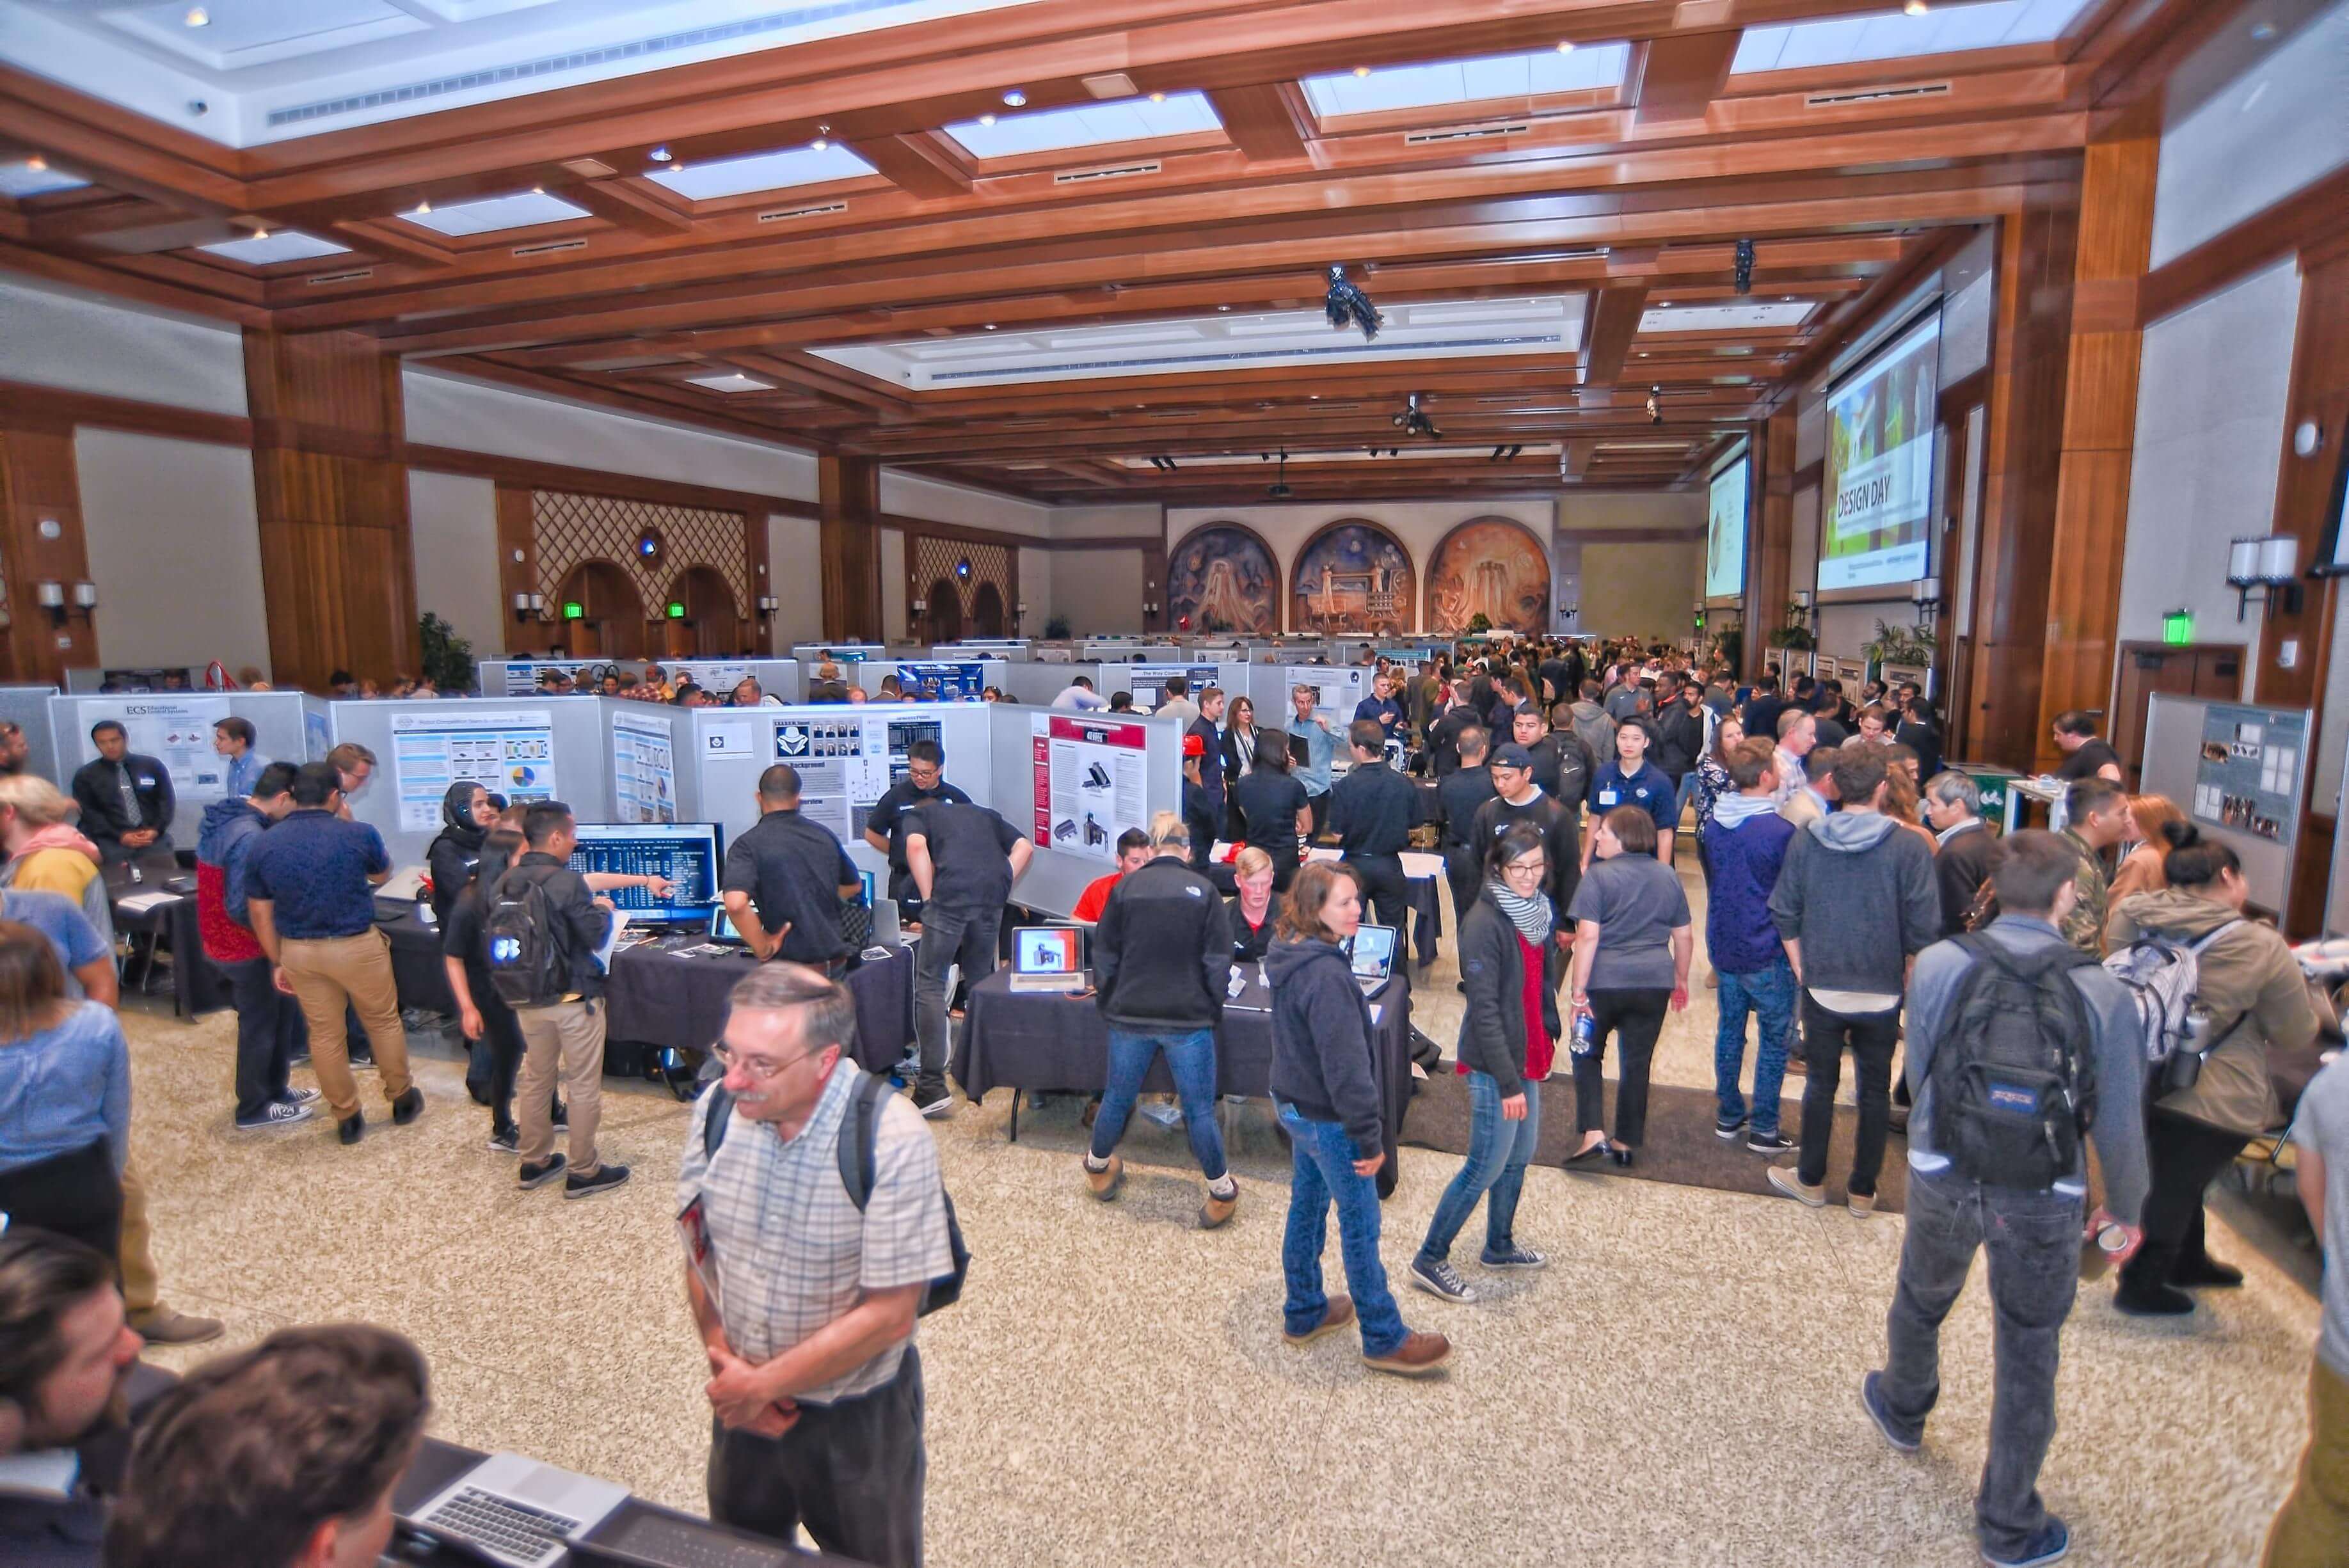 The crowd at 2018 Design Day.